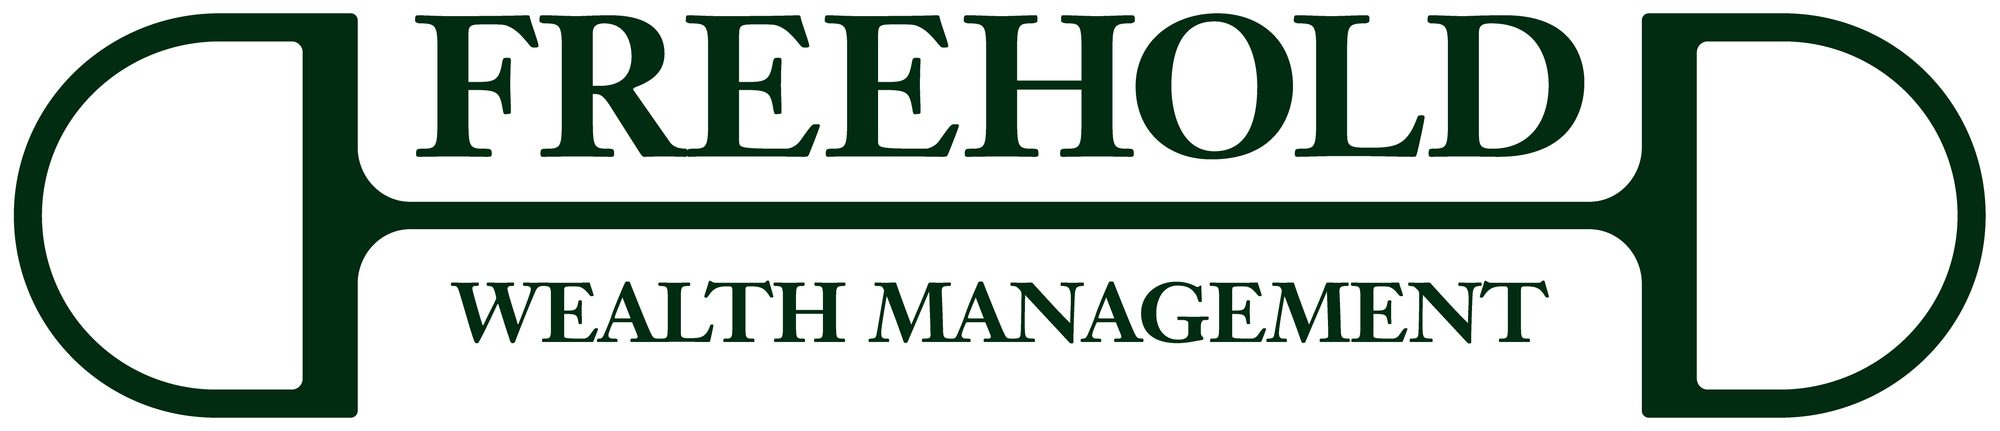 Freehold Wealth Management